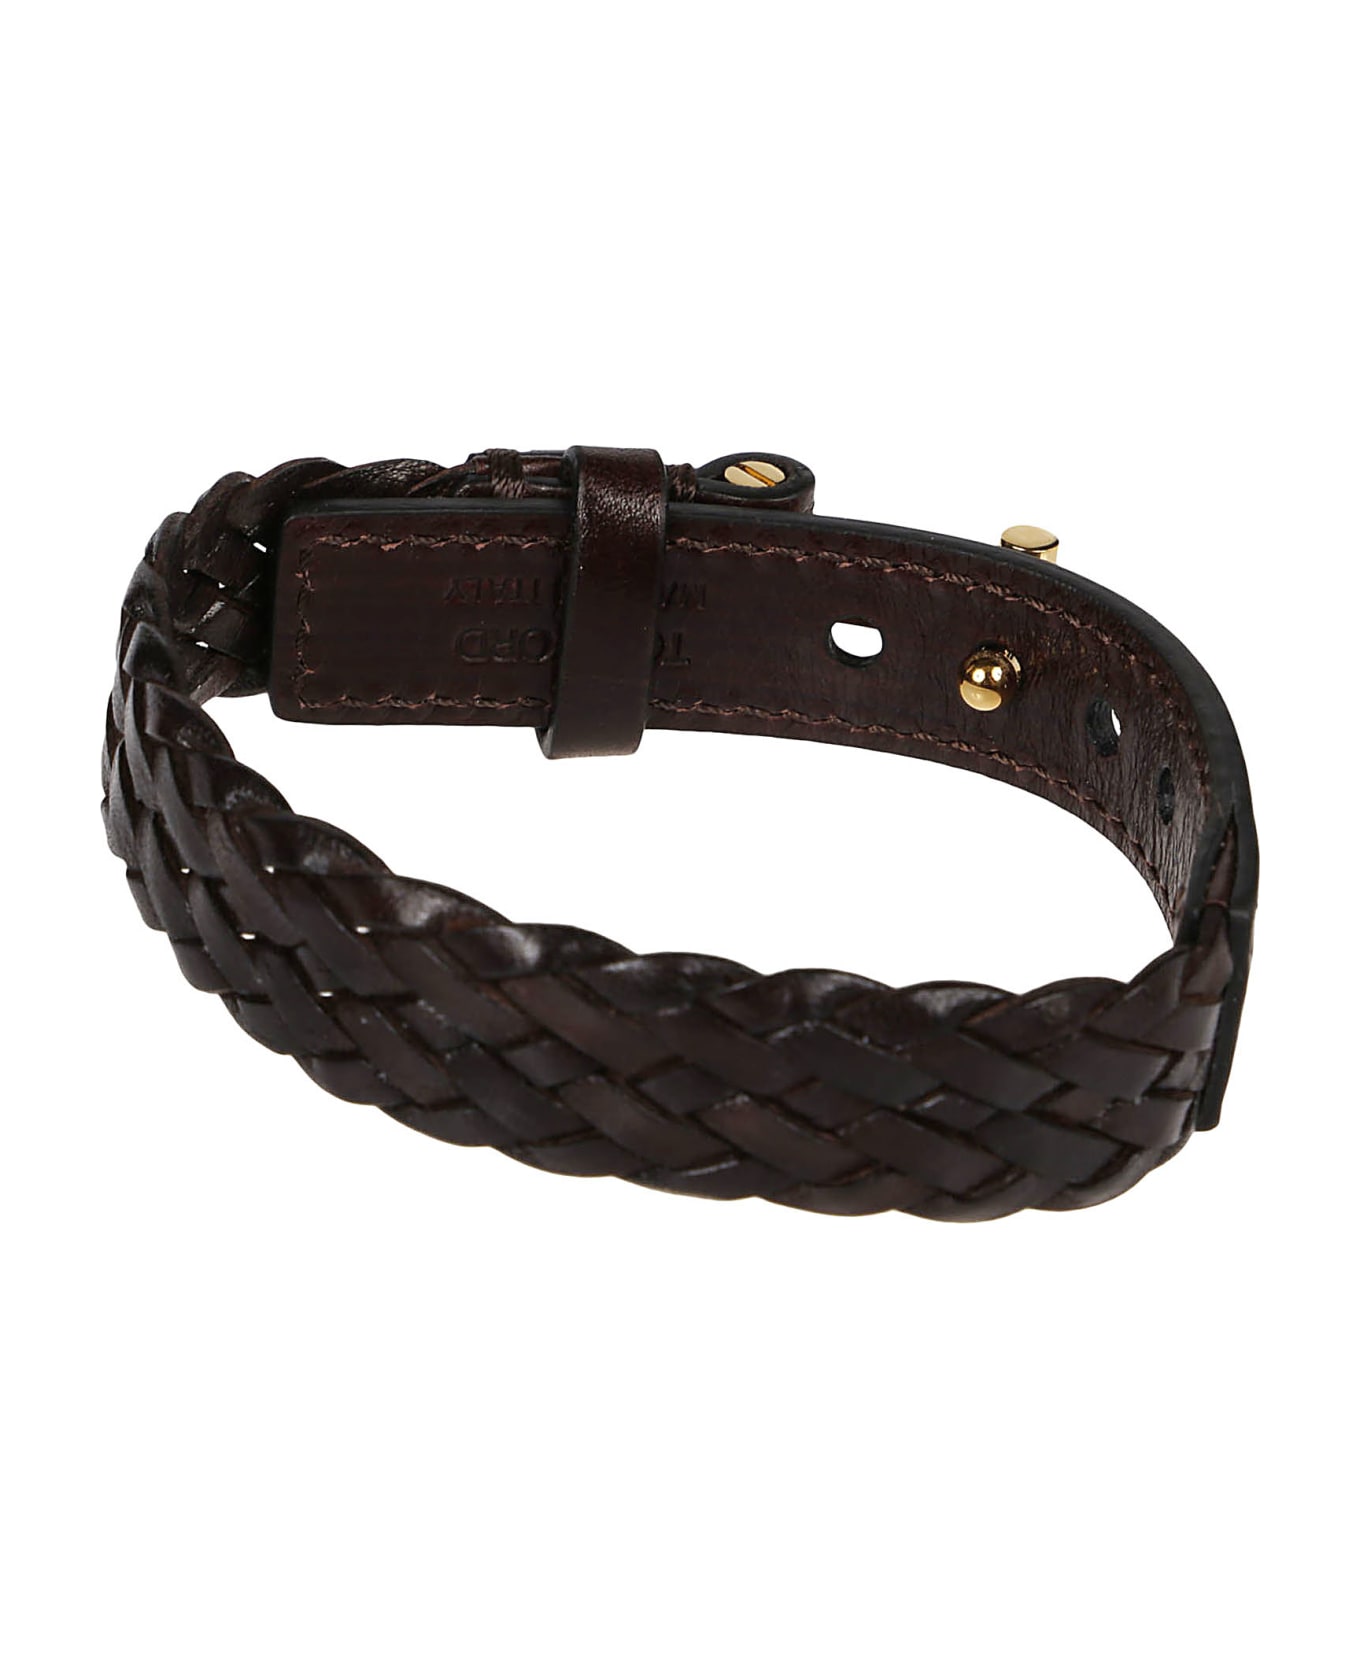 Tom Ford Bracelet - JuzsportsShops App for iOS and Android